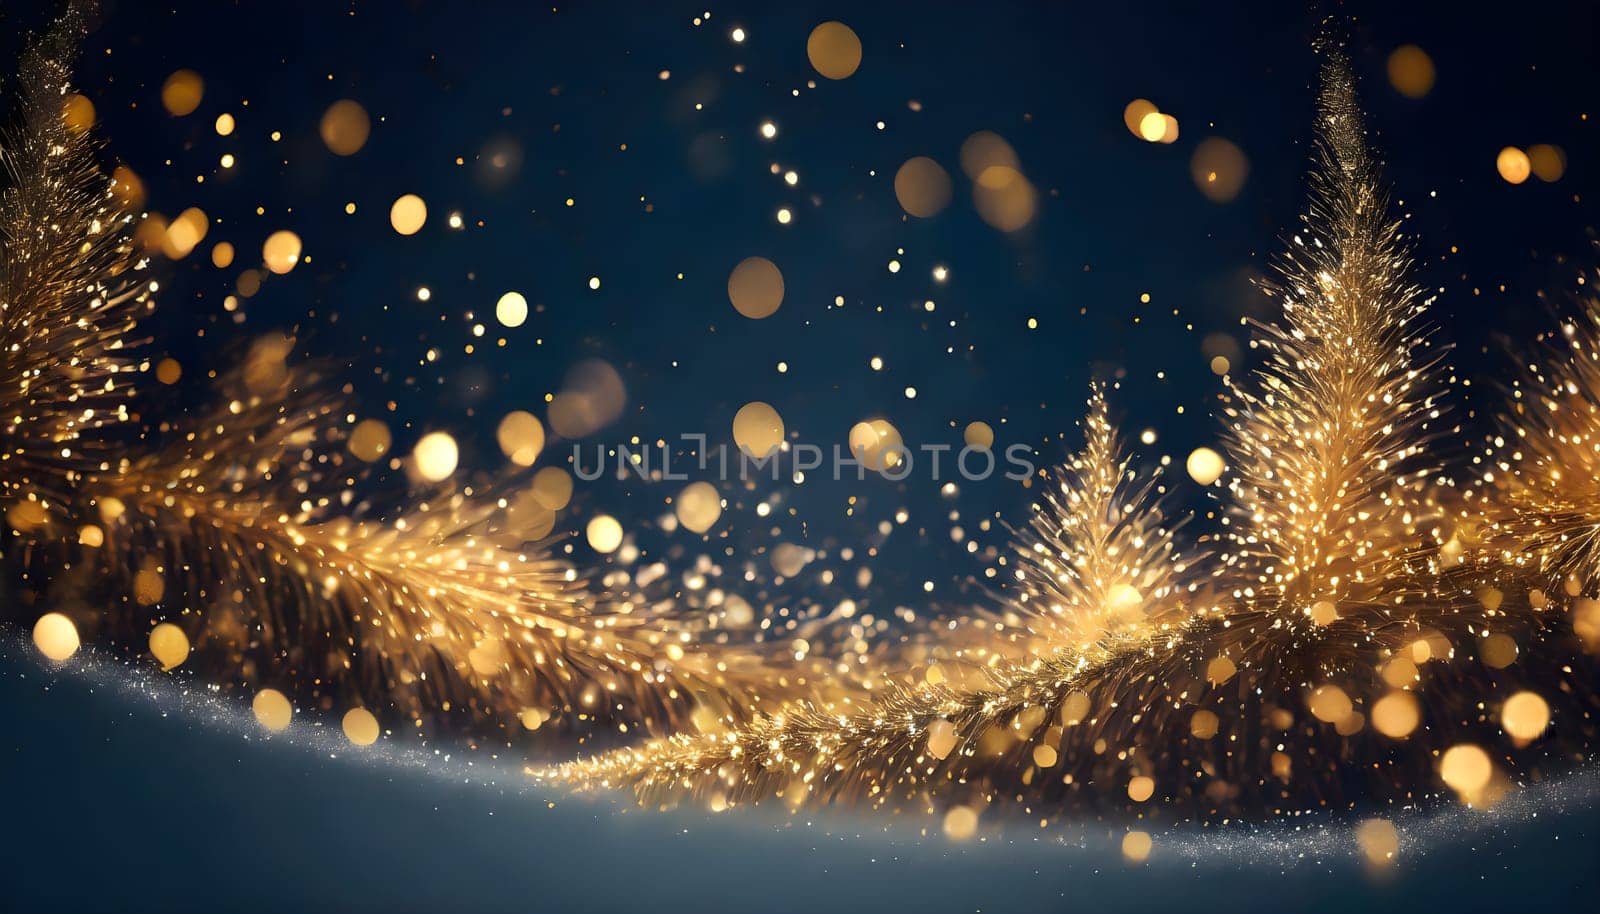 A stunning winter wonderland with golden particles dancing in the air, creating a mesmerizing bokeh effect against a deep navy background c